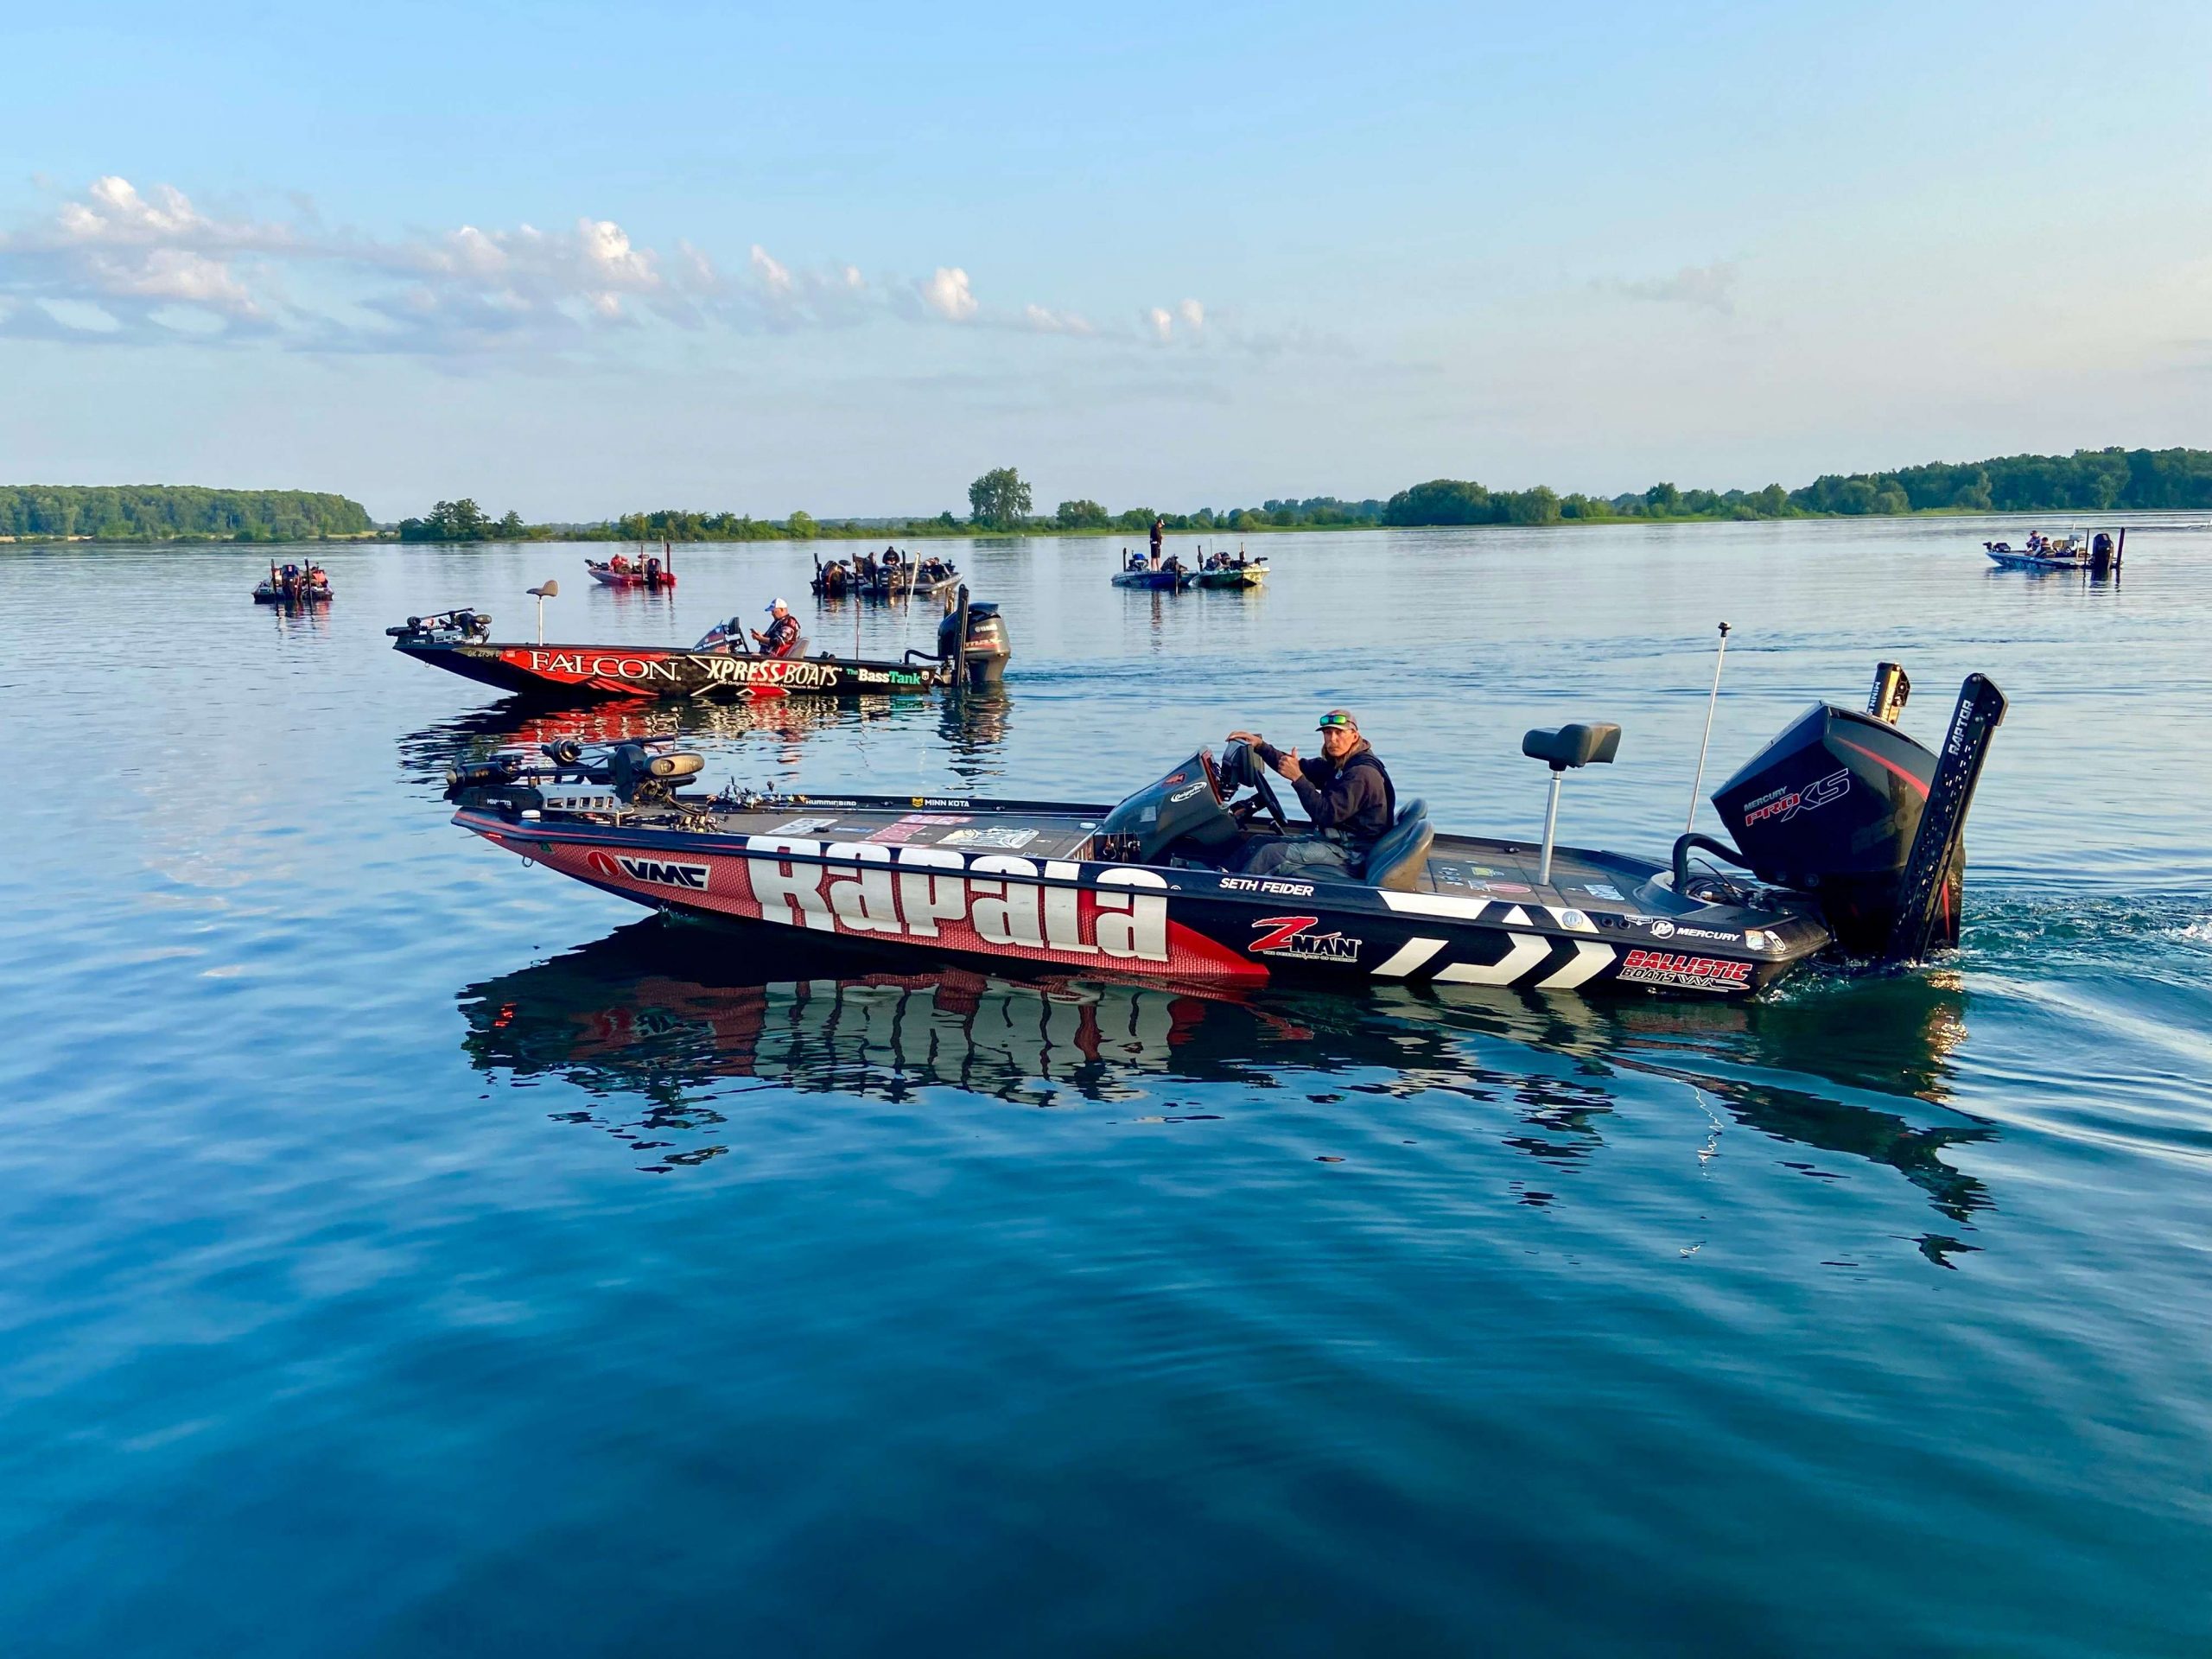 Tag along with the Marshals on Day 1 of the Farmers Insurance Bassmaster Elite at St. Lawrence River